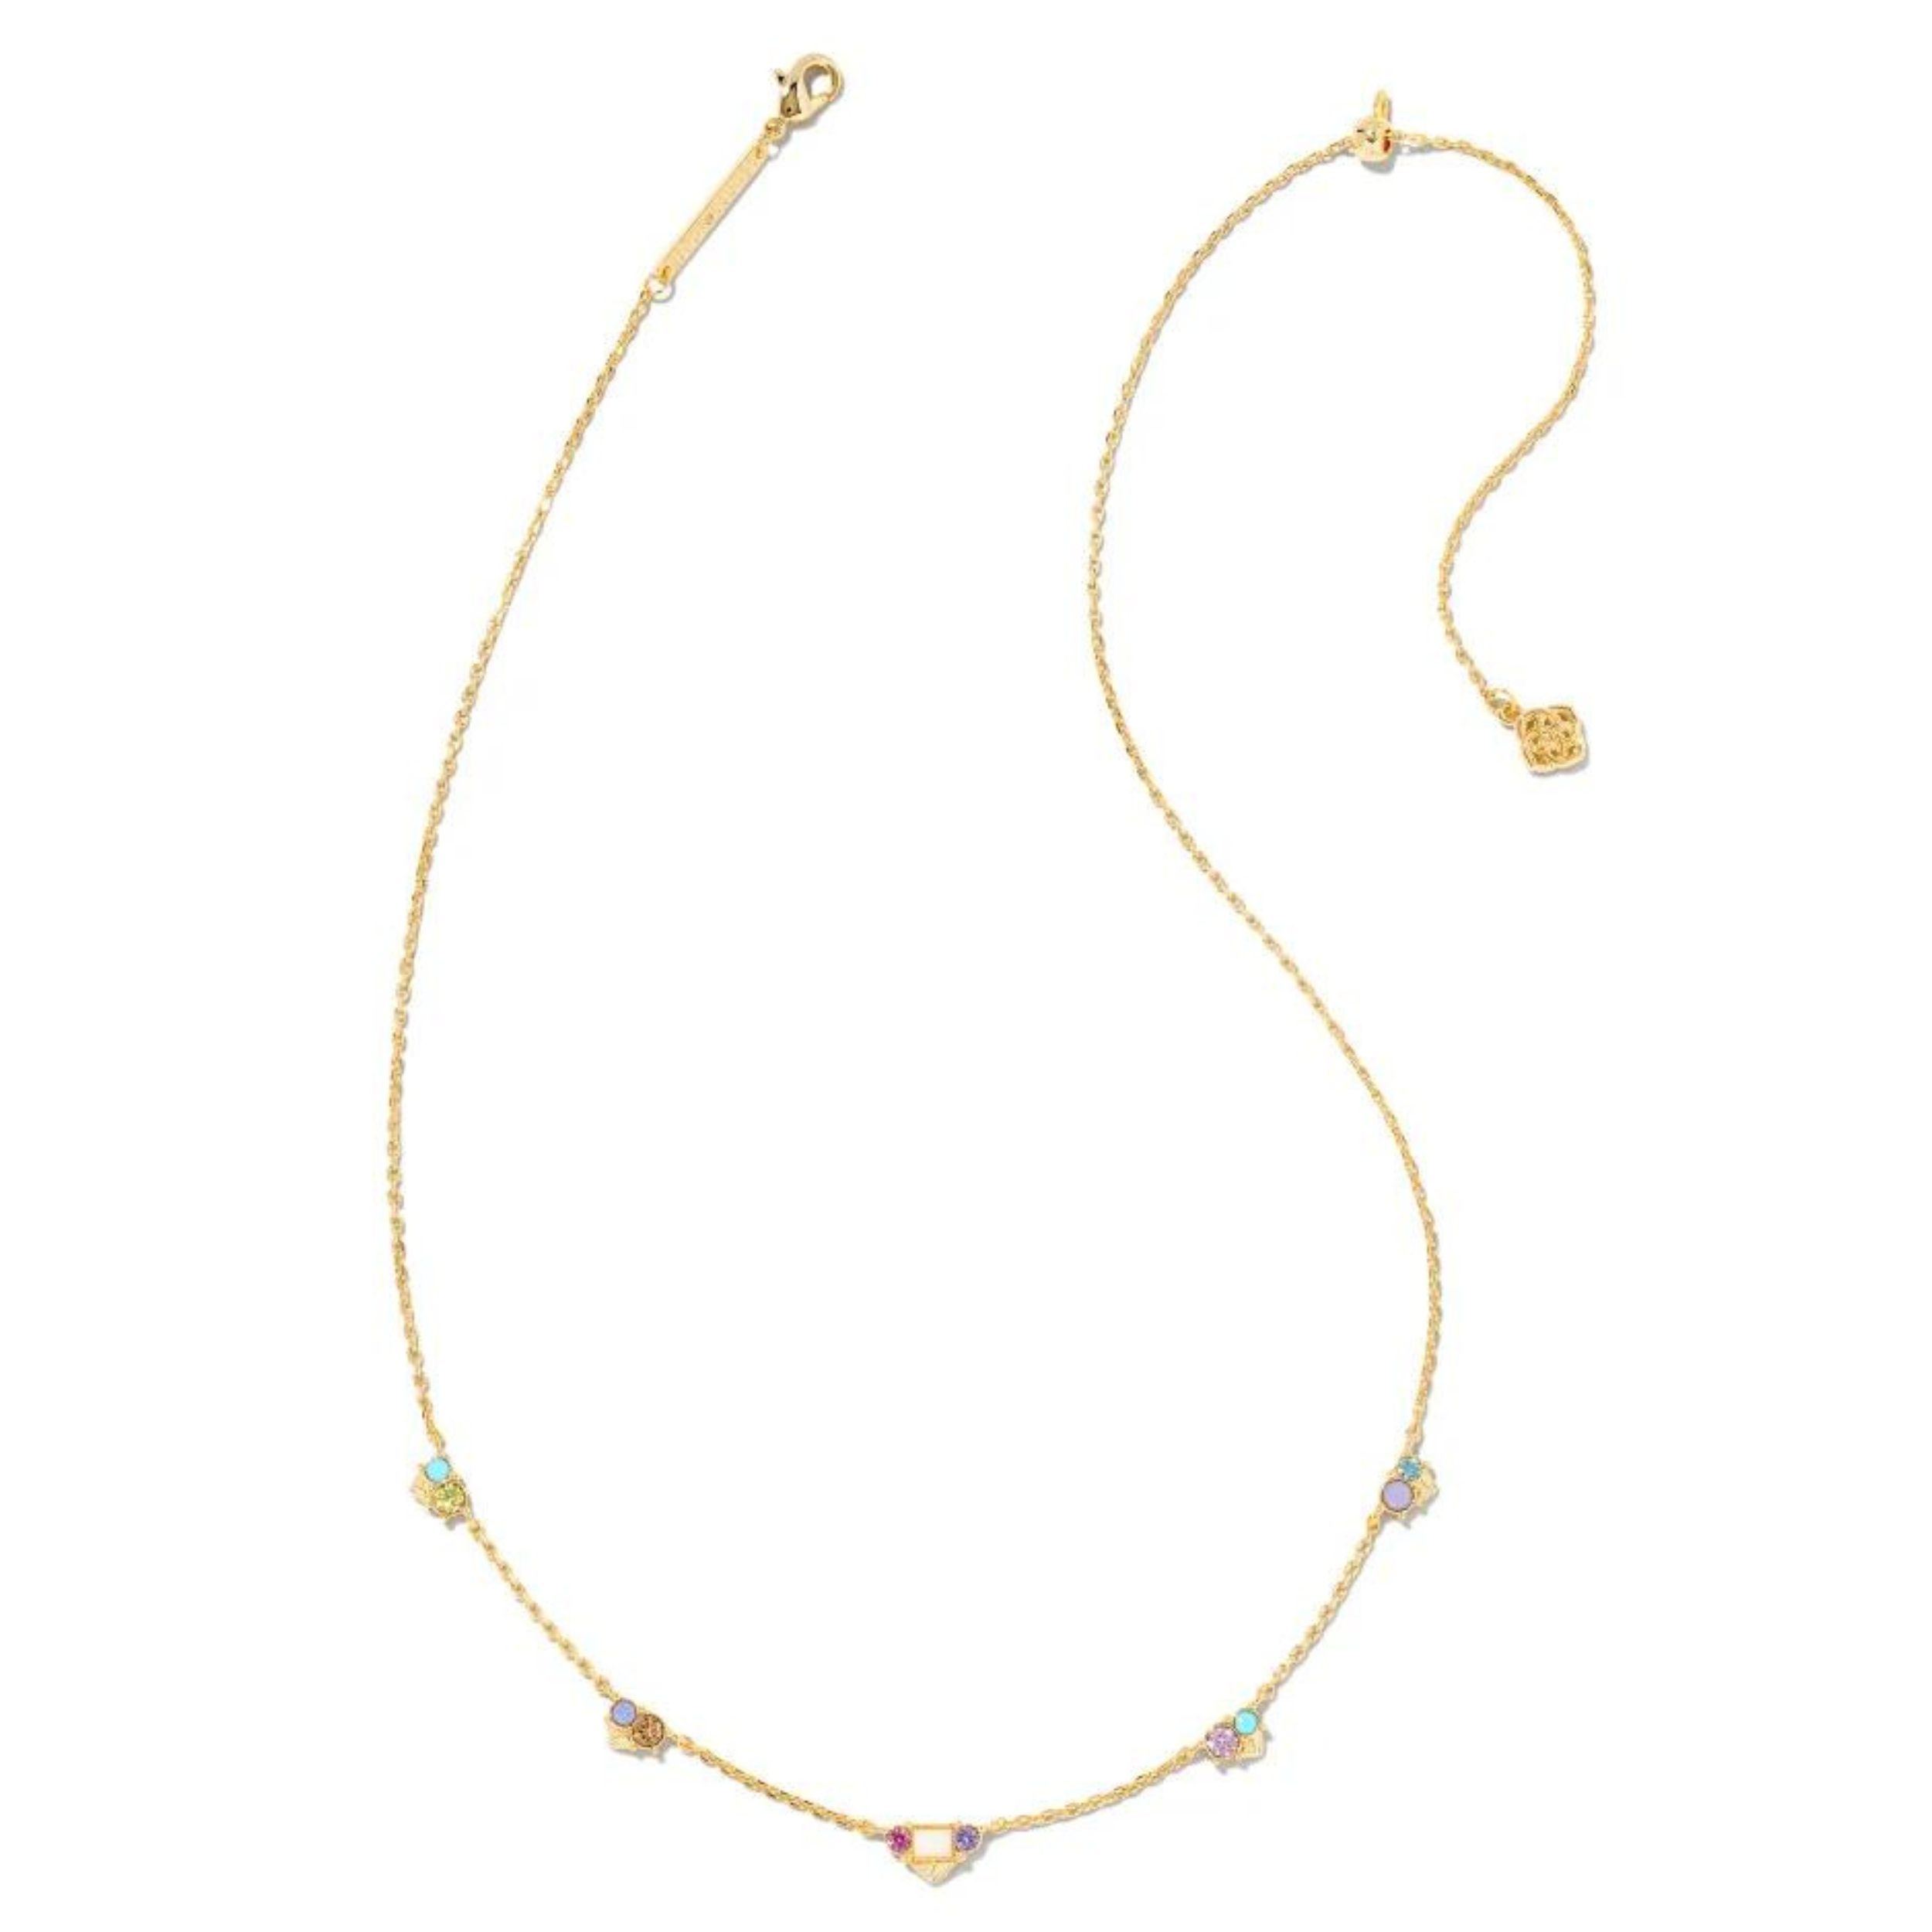 Gold necklace with pastel mix crystals, pictured on a white background.